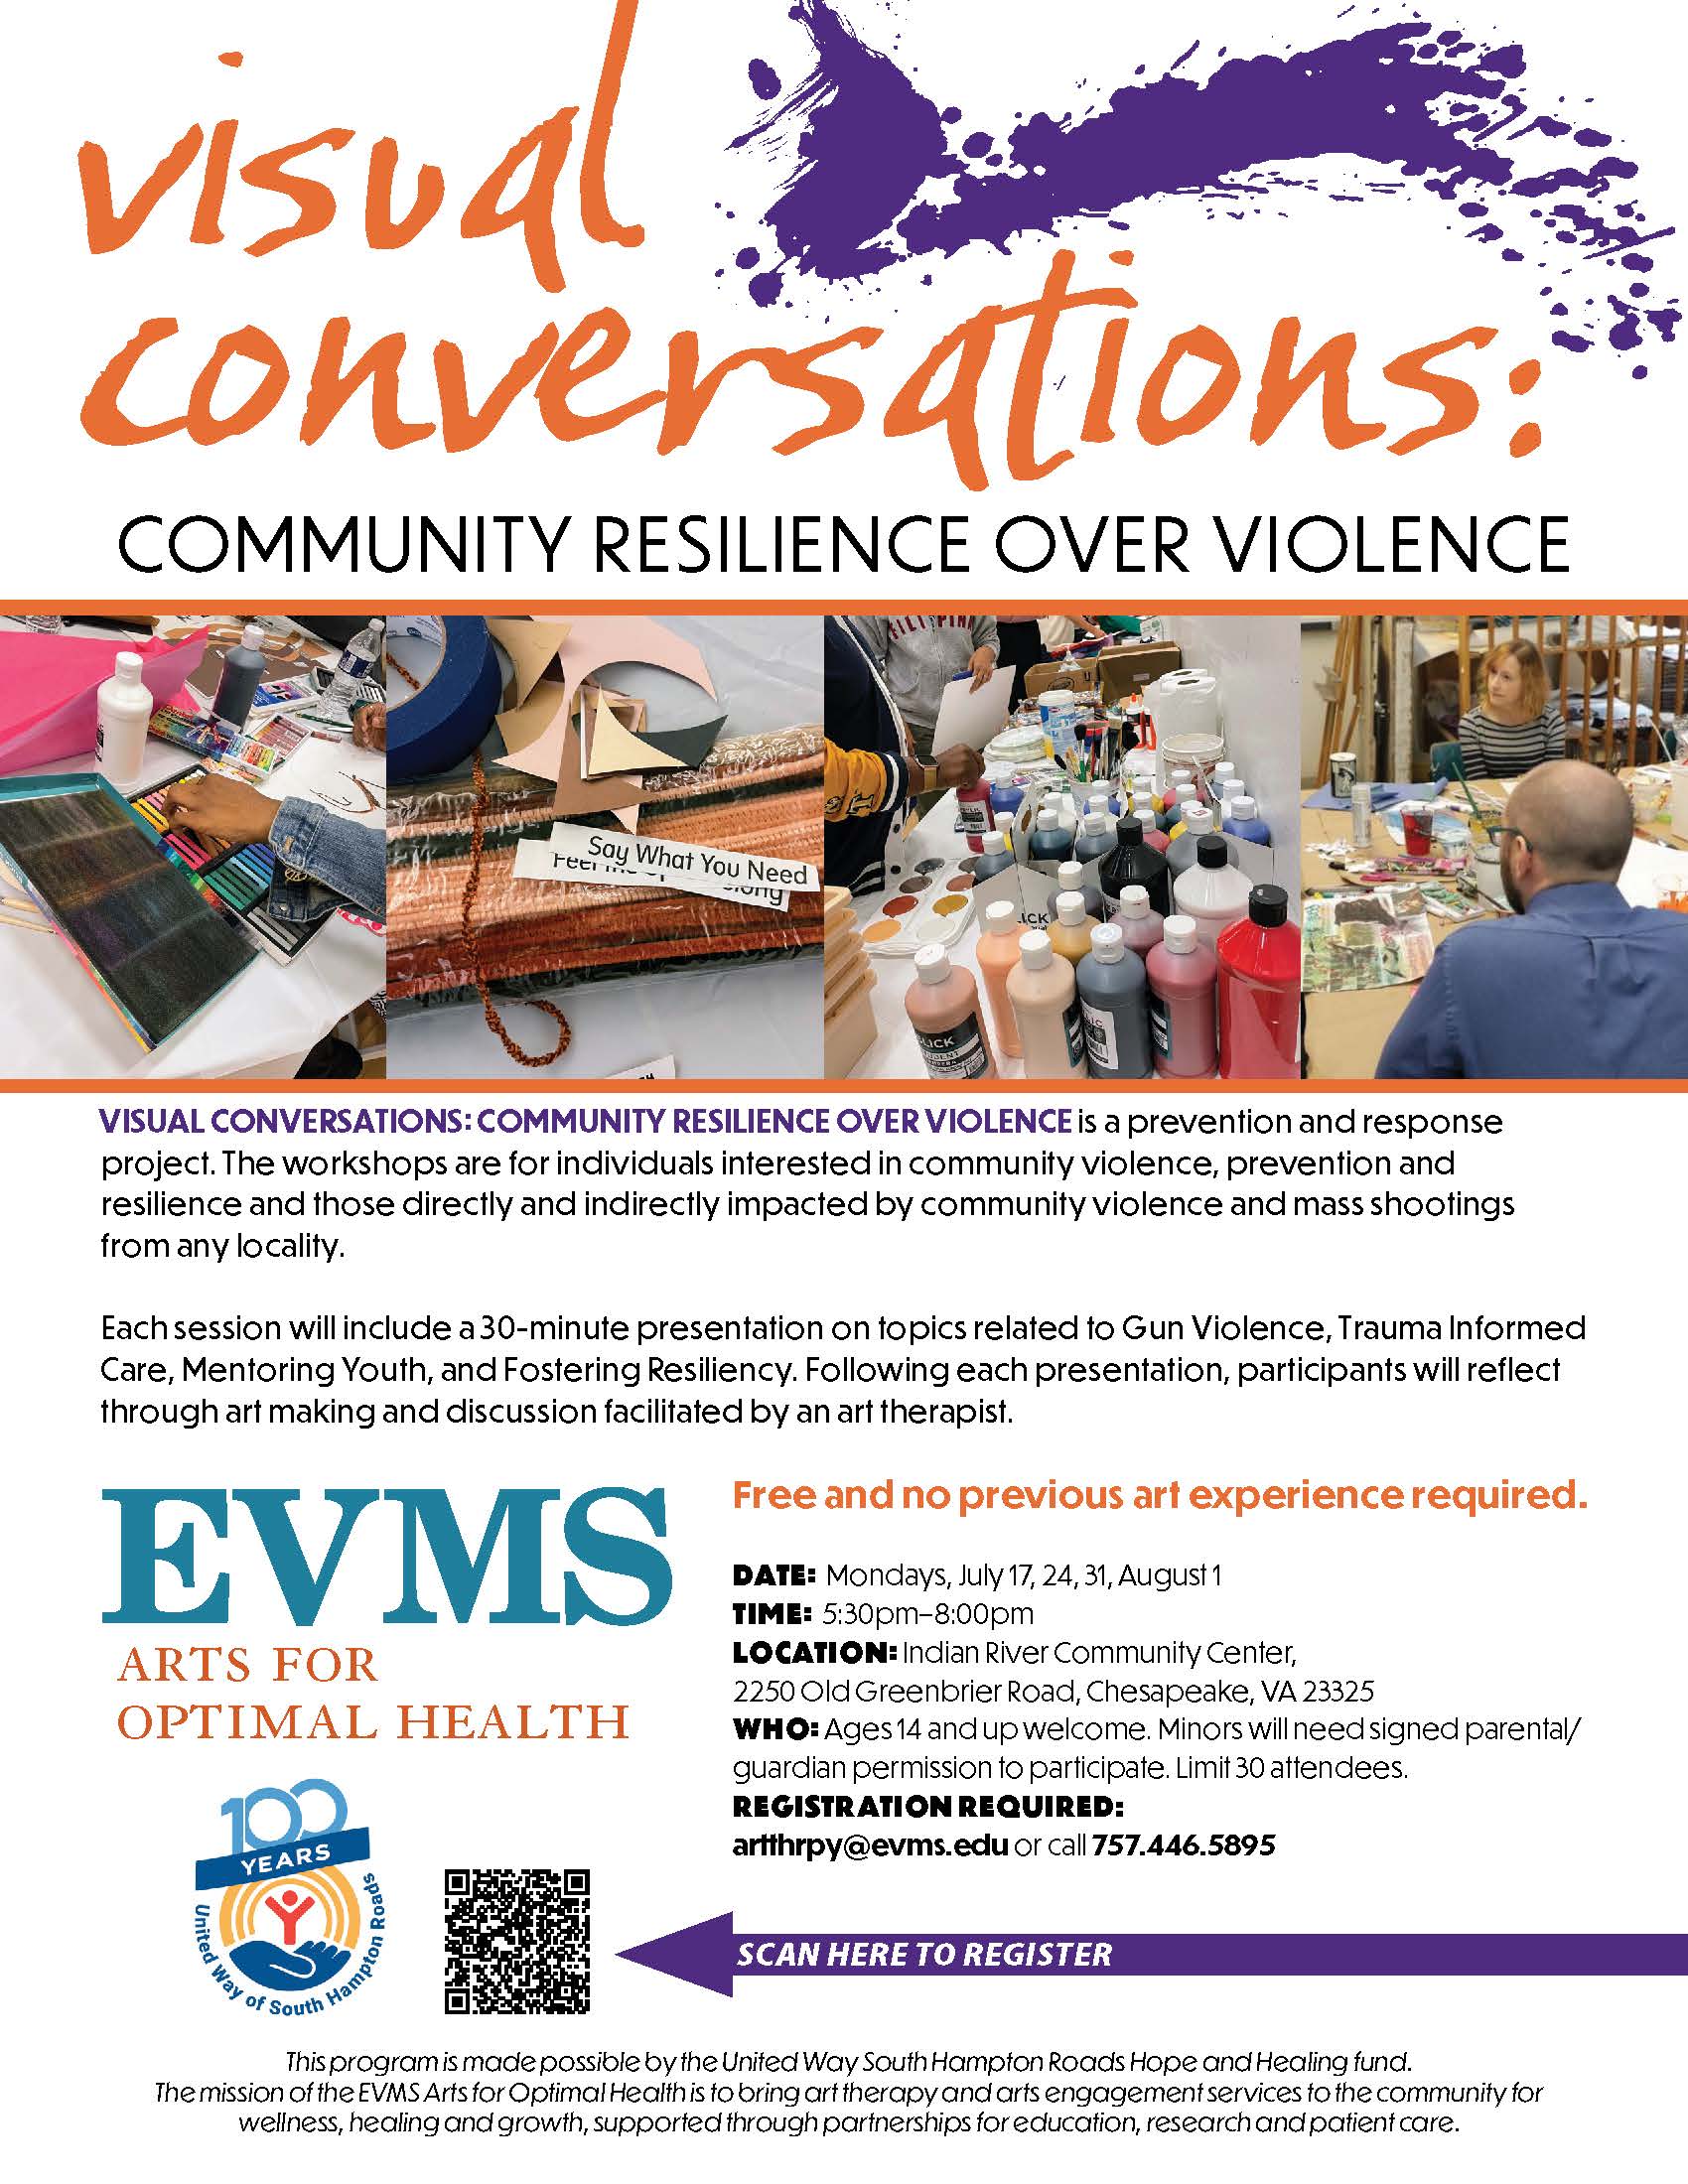 Visual Conversations: Community Resilience over Violence project